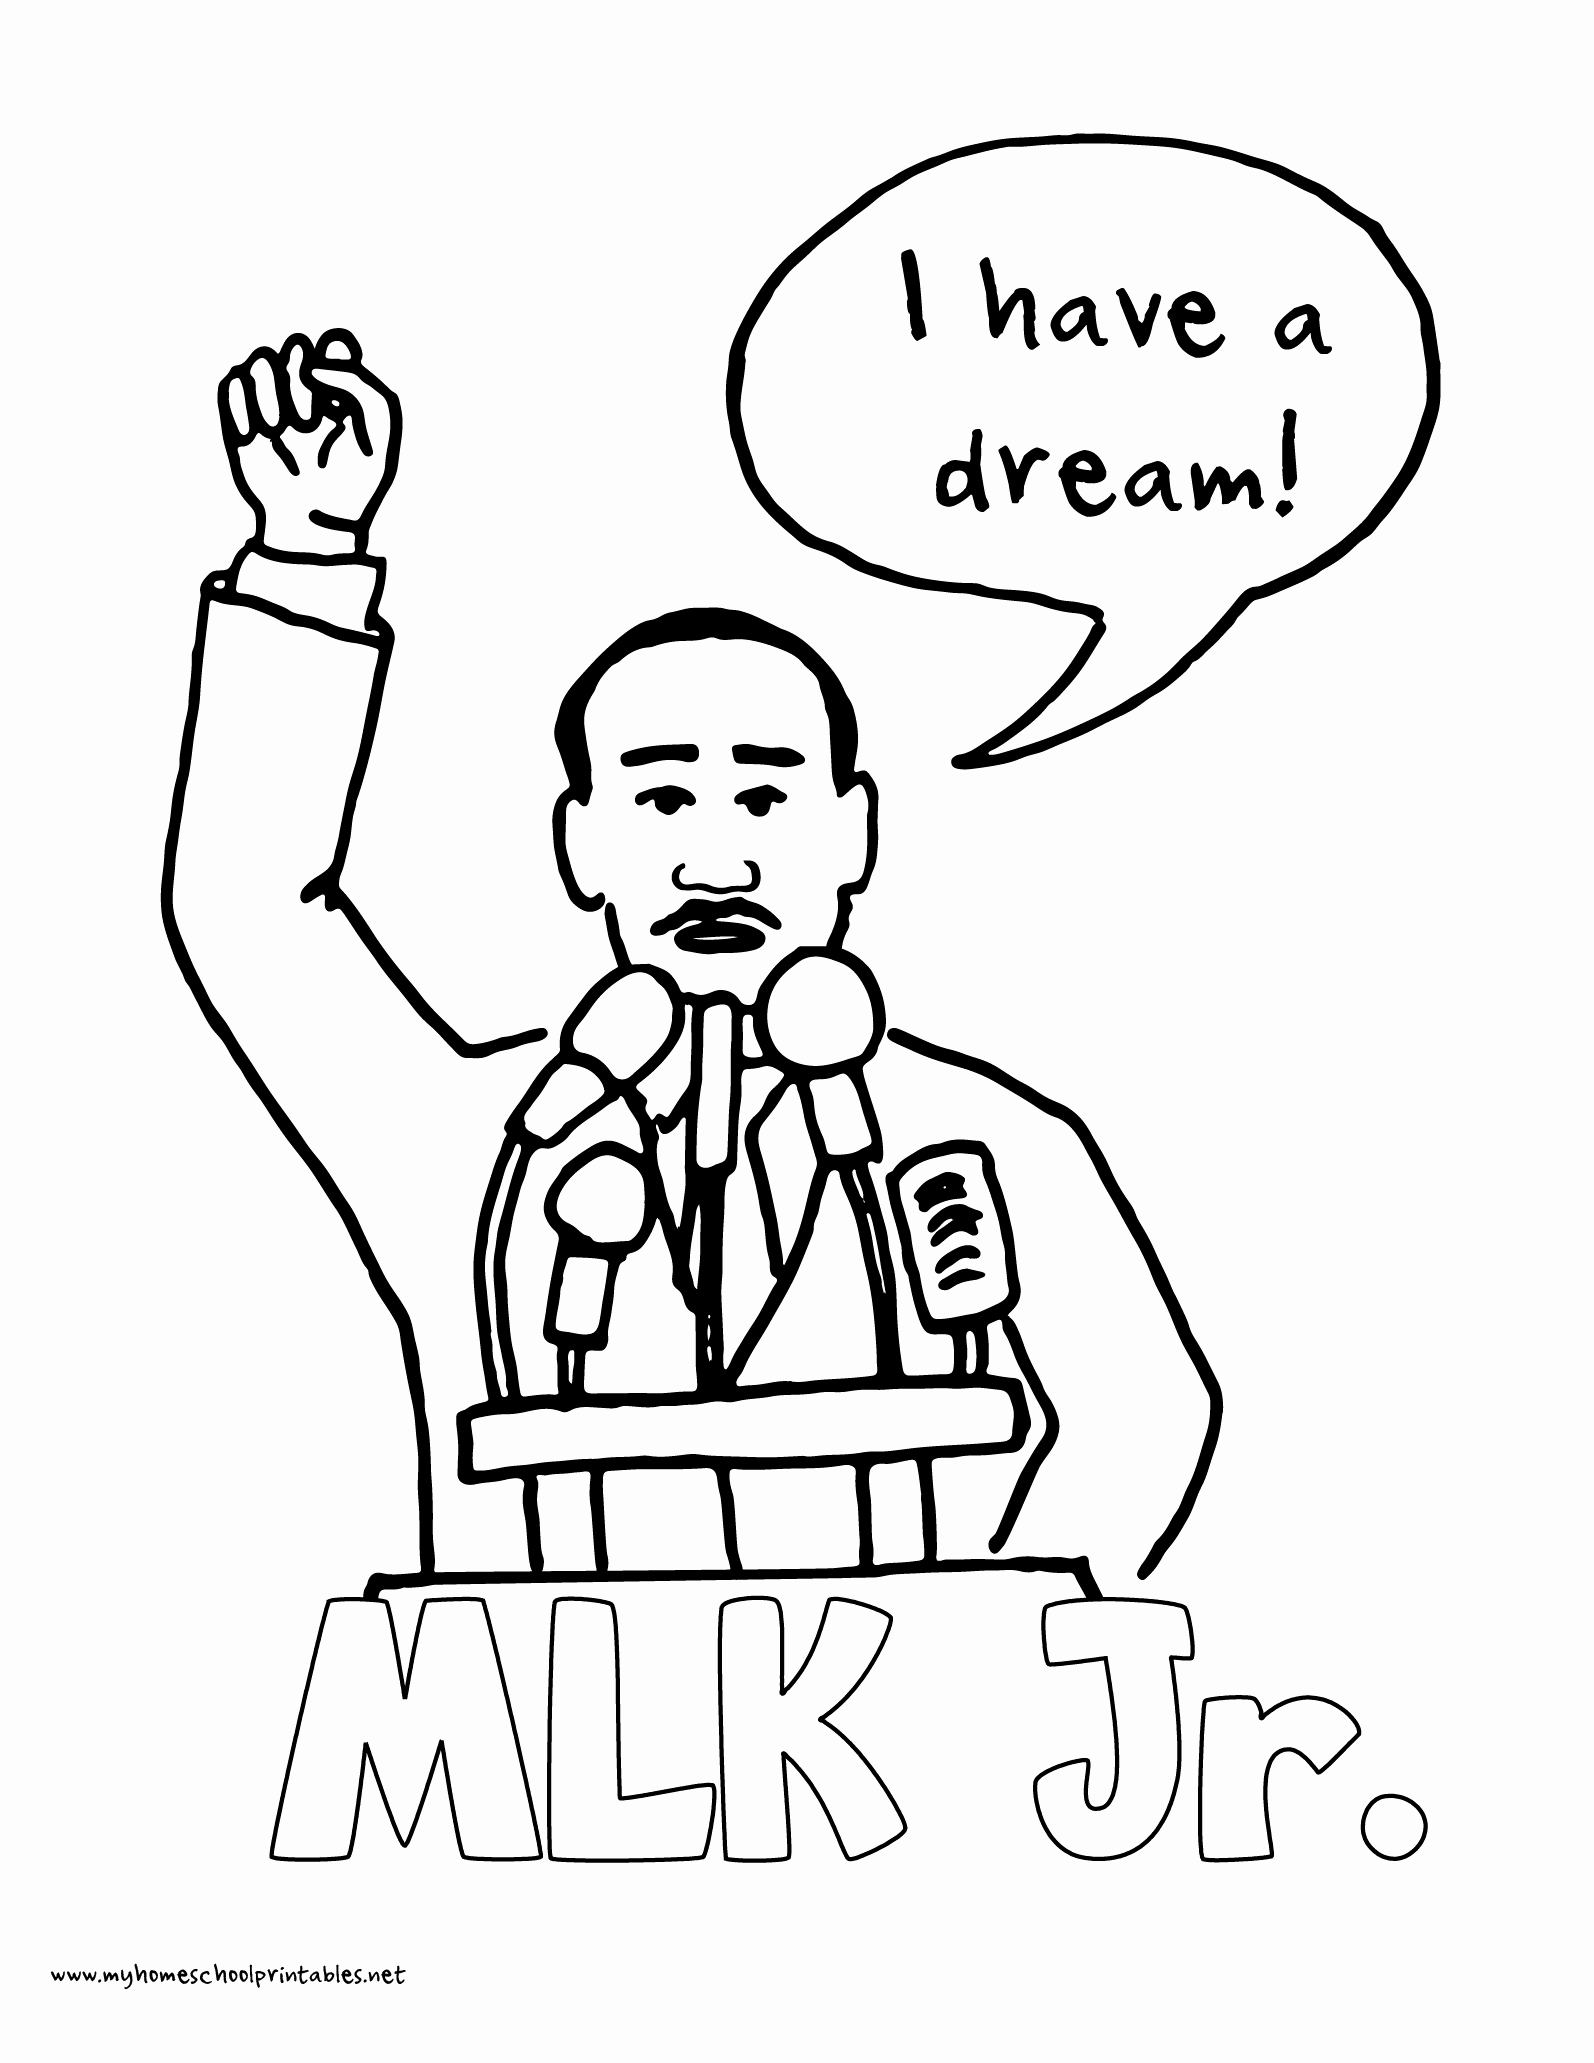 Martin Luther King Jr Template Awesome I Have A Dream Speech Martin Luther King Jr Page Coloring